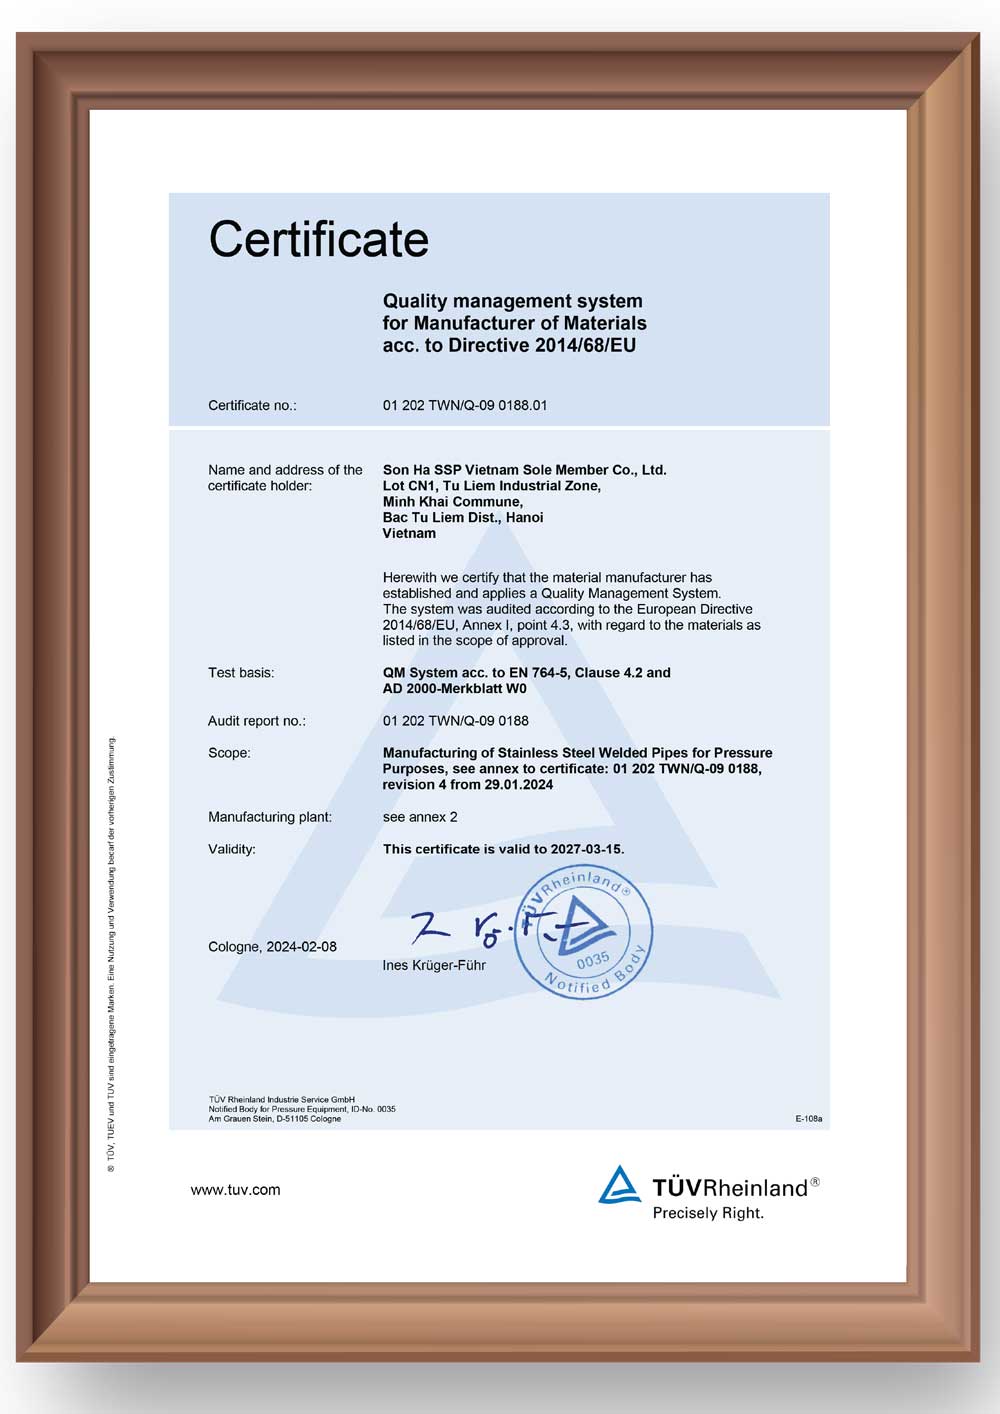 Son Ha SSP is proud to be the only Vietnamese company with the PED certification from the international organization TUV of Germany.